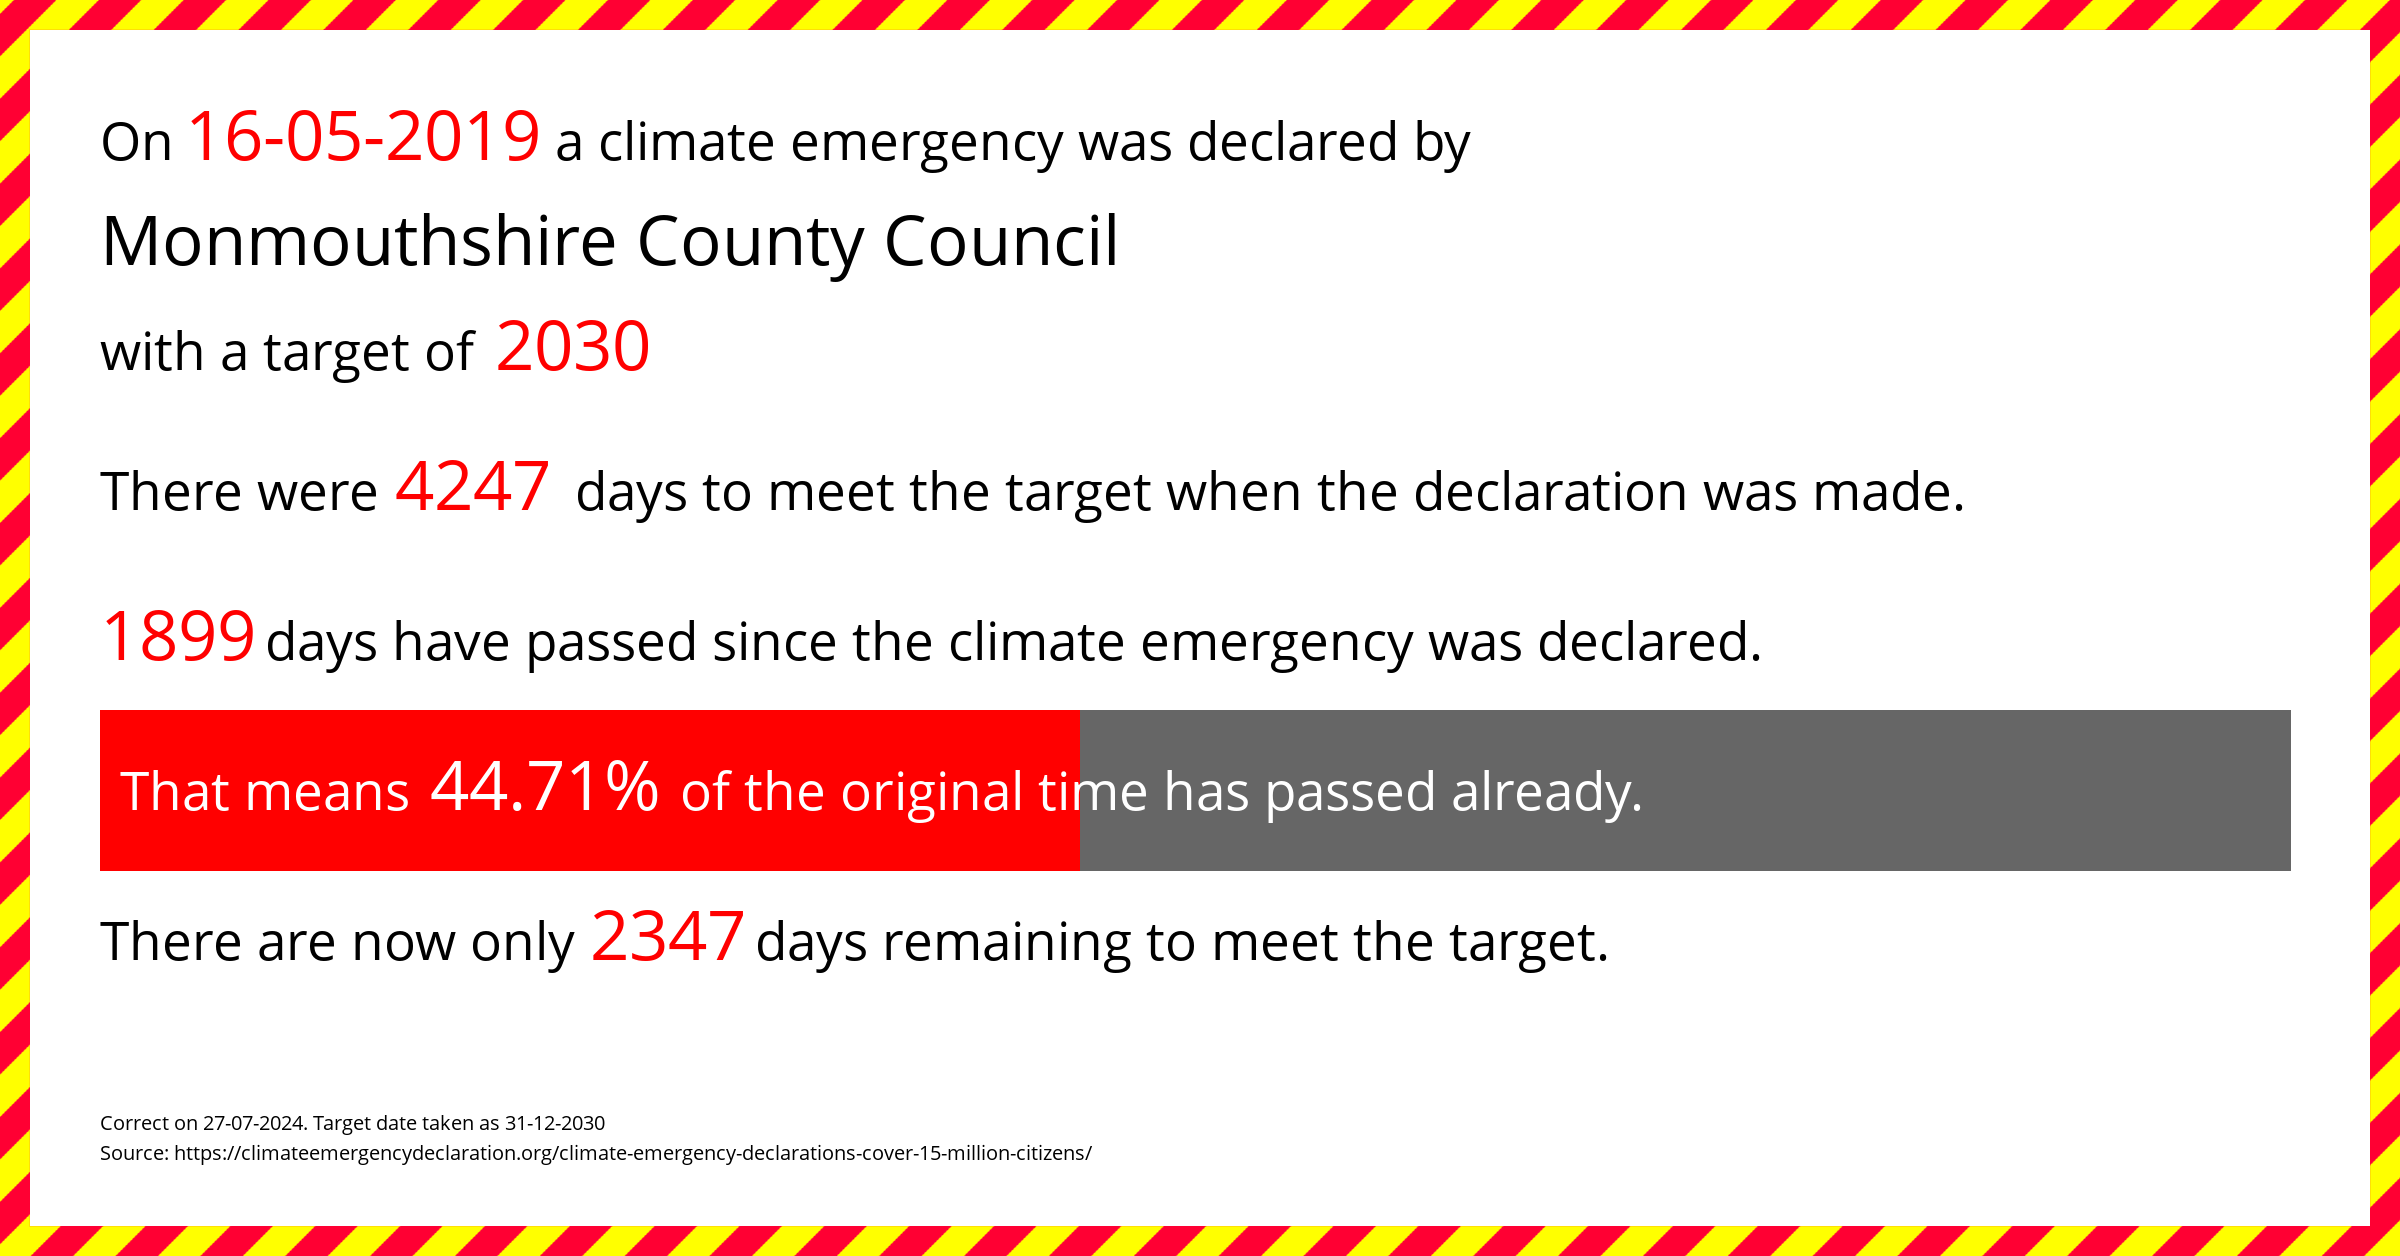 Monmouthshire County Council declared a Climate emergency on Thursday 16th May 2019, with a target of 2030.